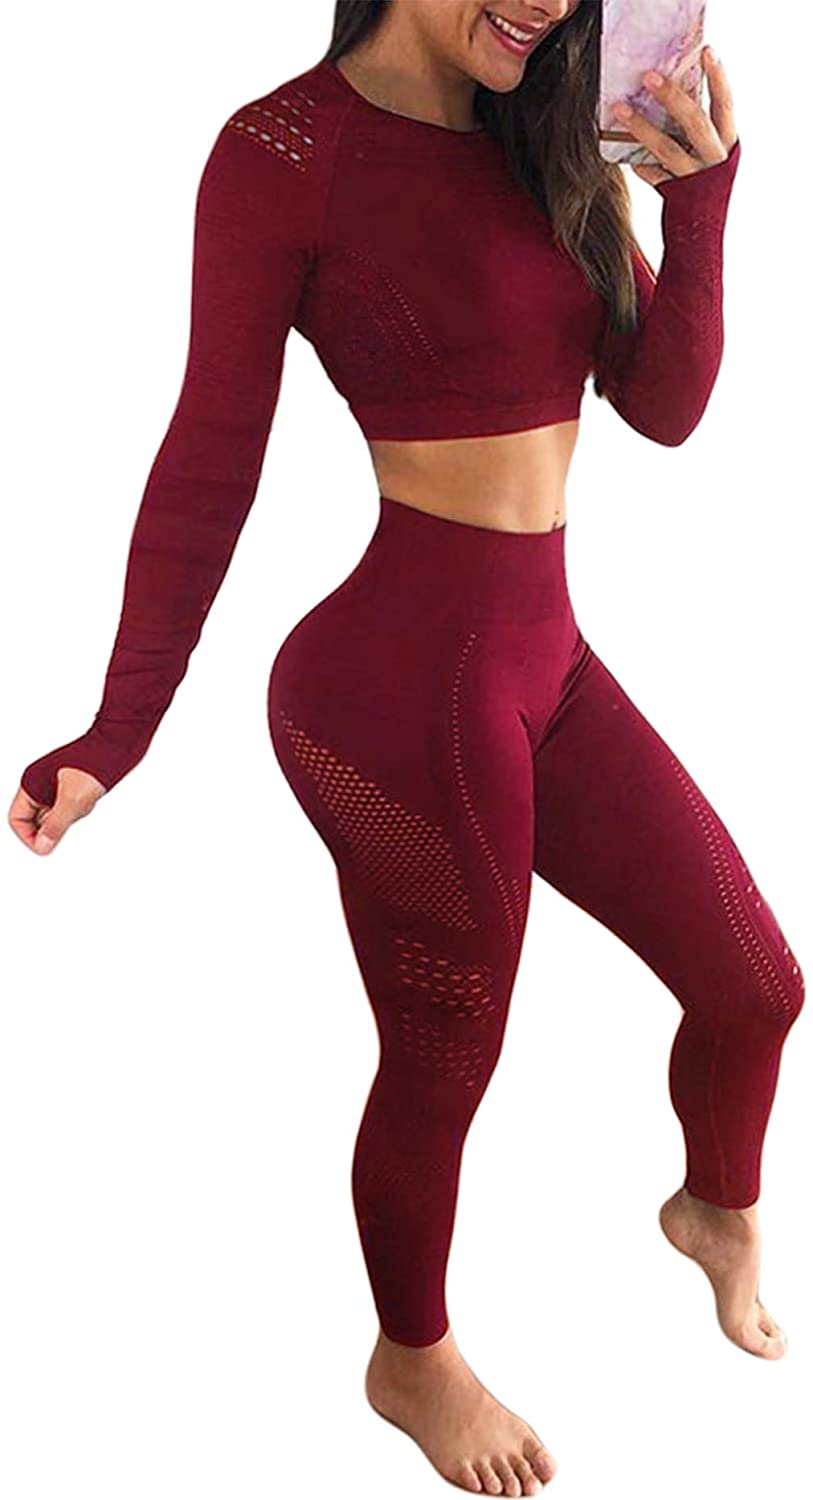 YOFIT Women's Seamless Yoga Leggings and Long Sleeve Crop Top Gym Outfit Set